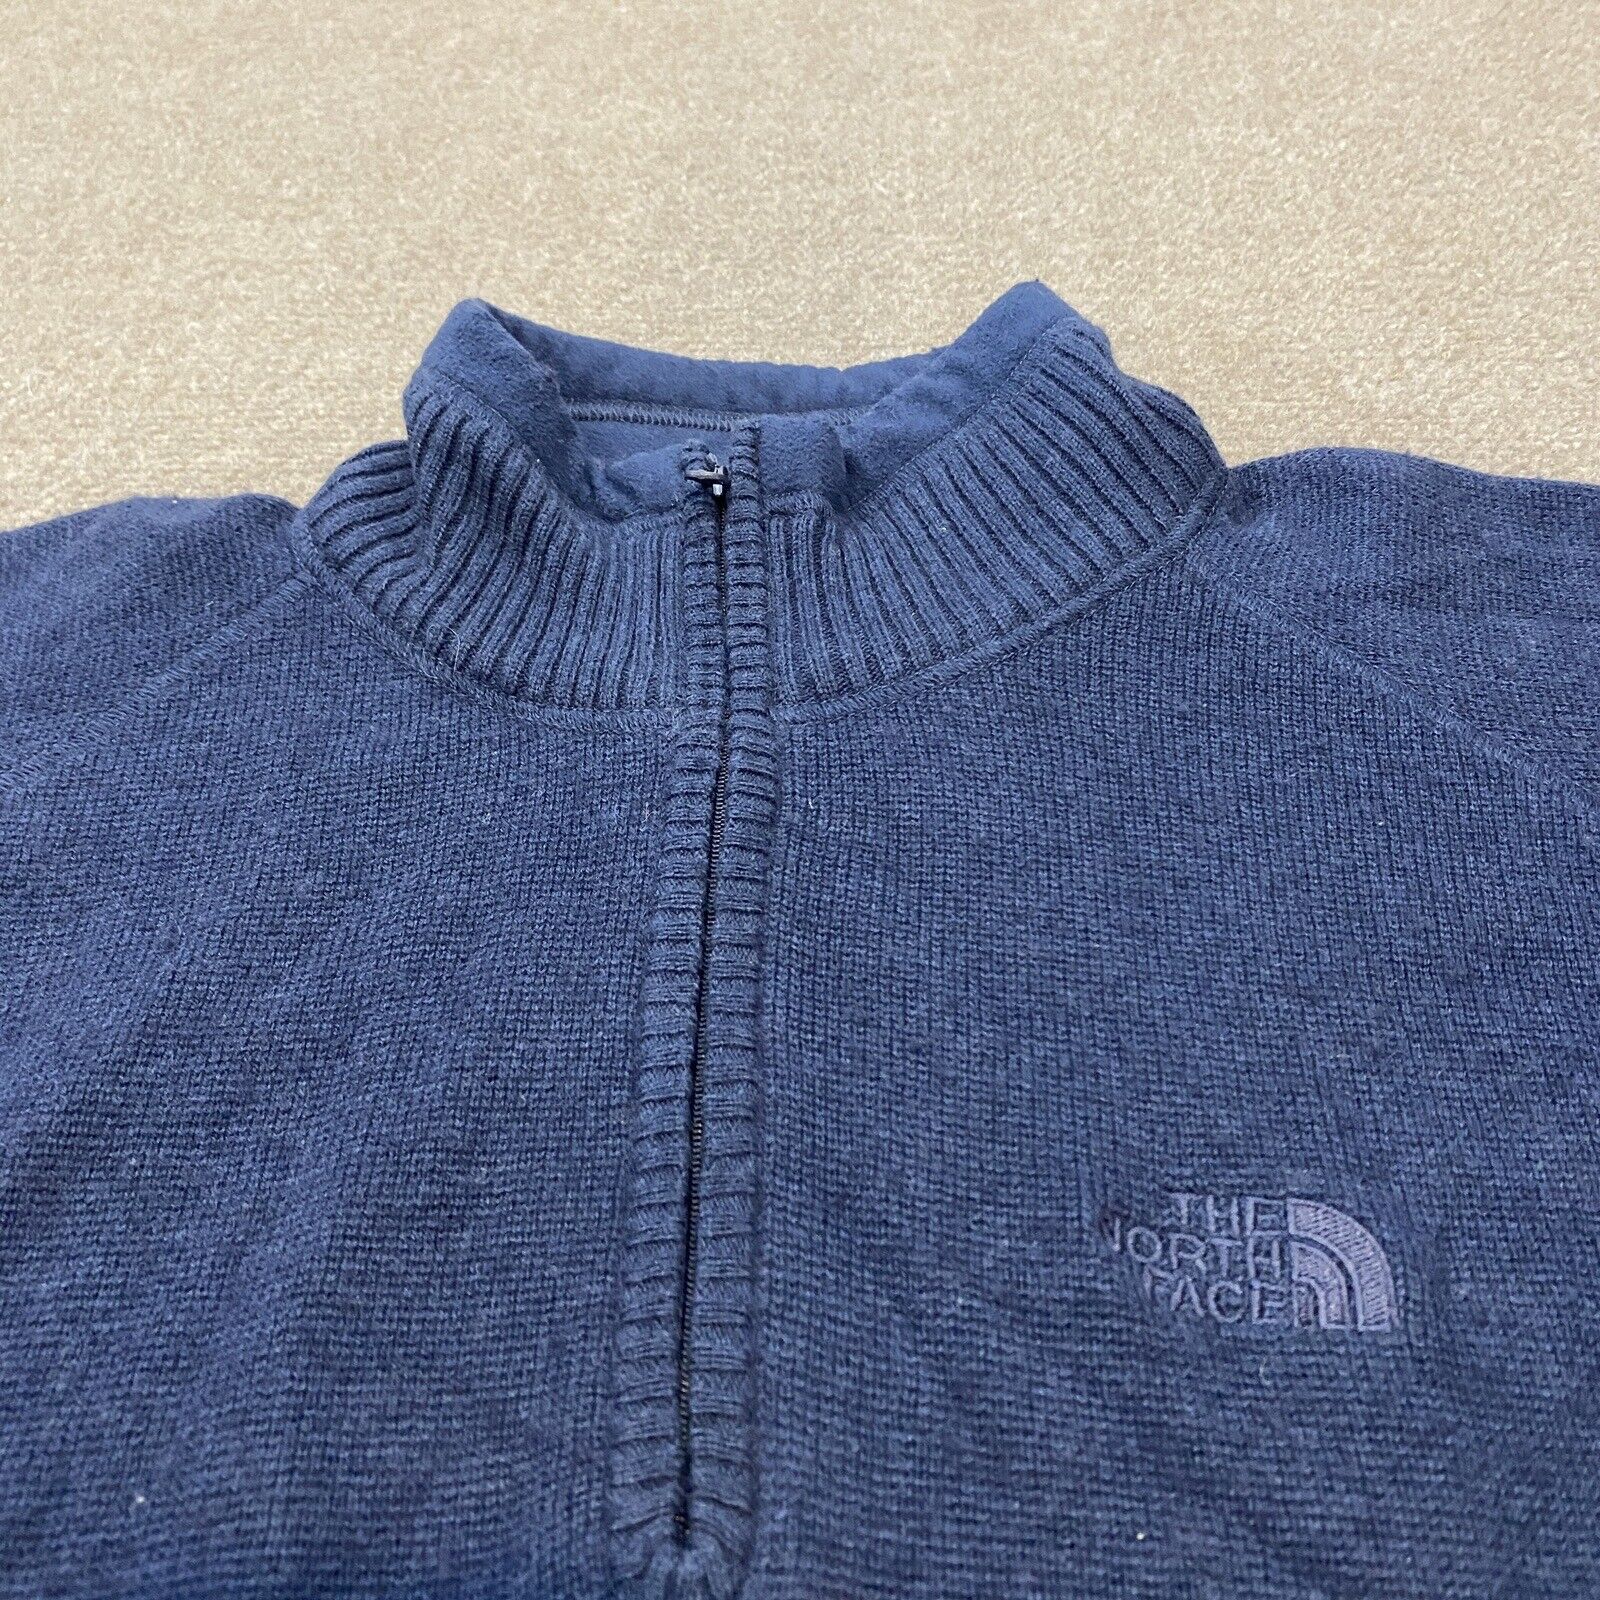 North Face Sweater Mens Large Navy Blue Pullover … - image 2